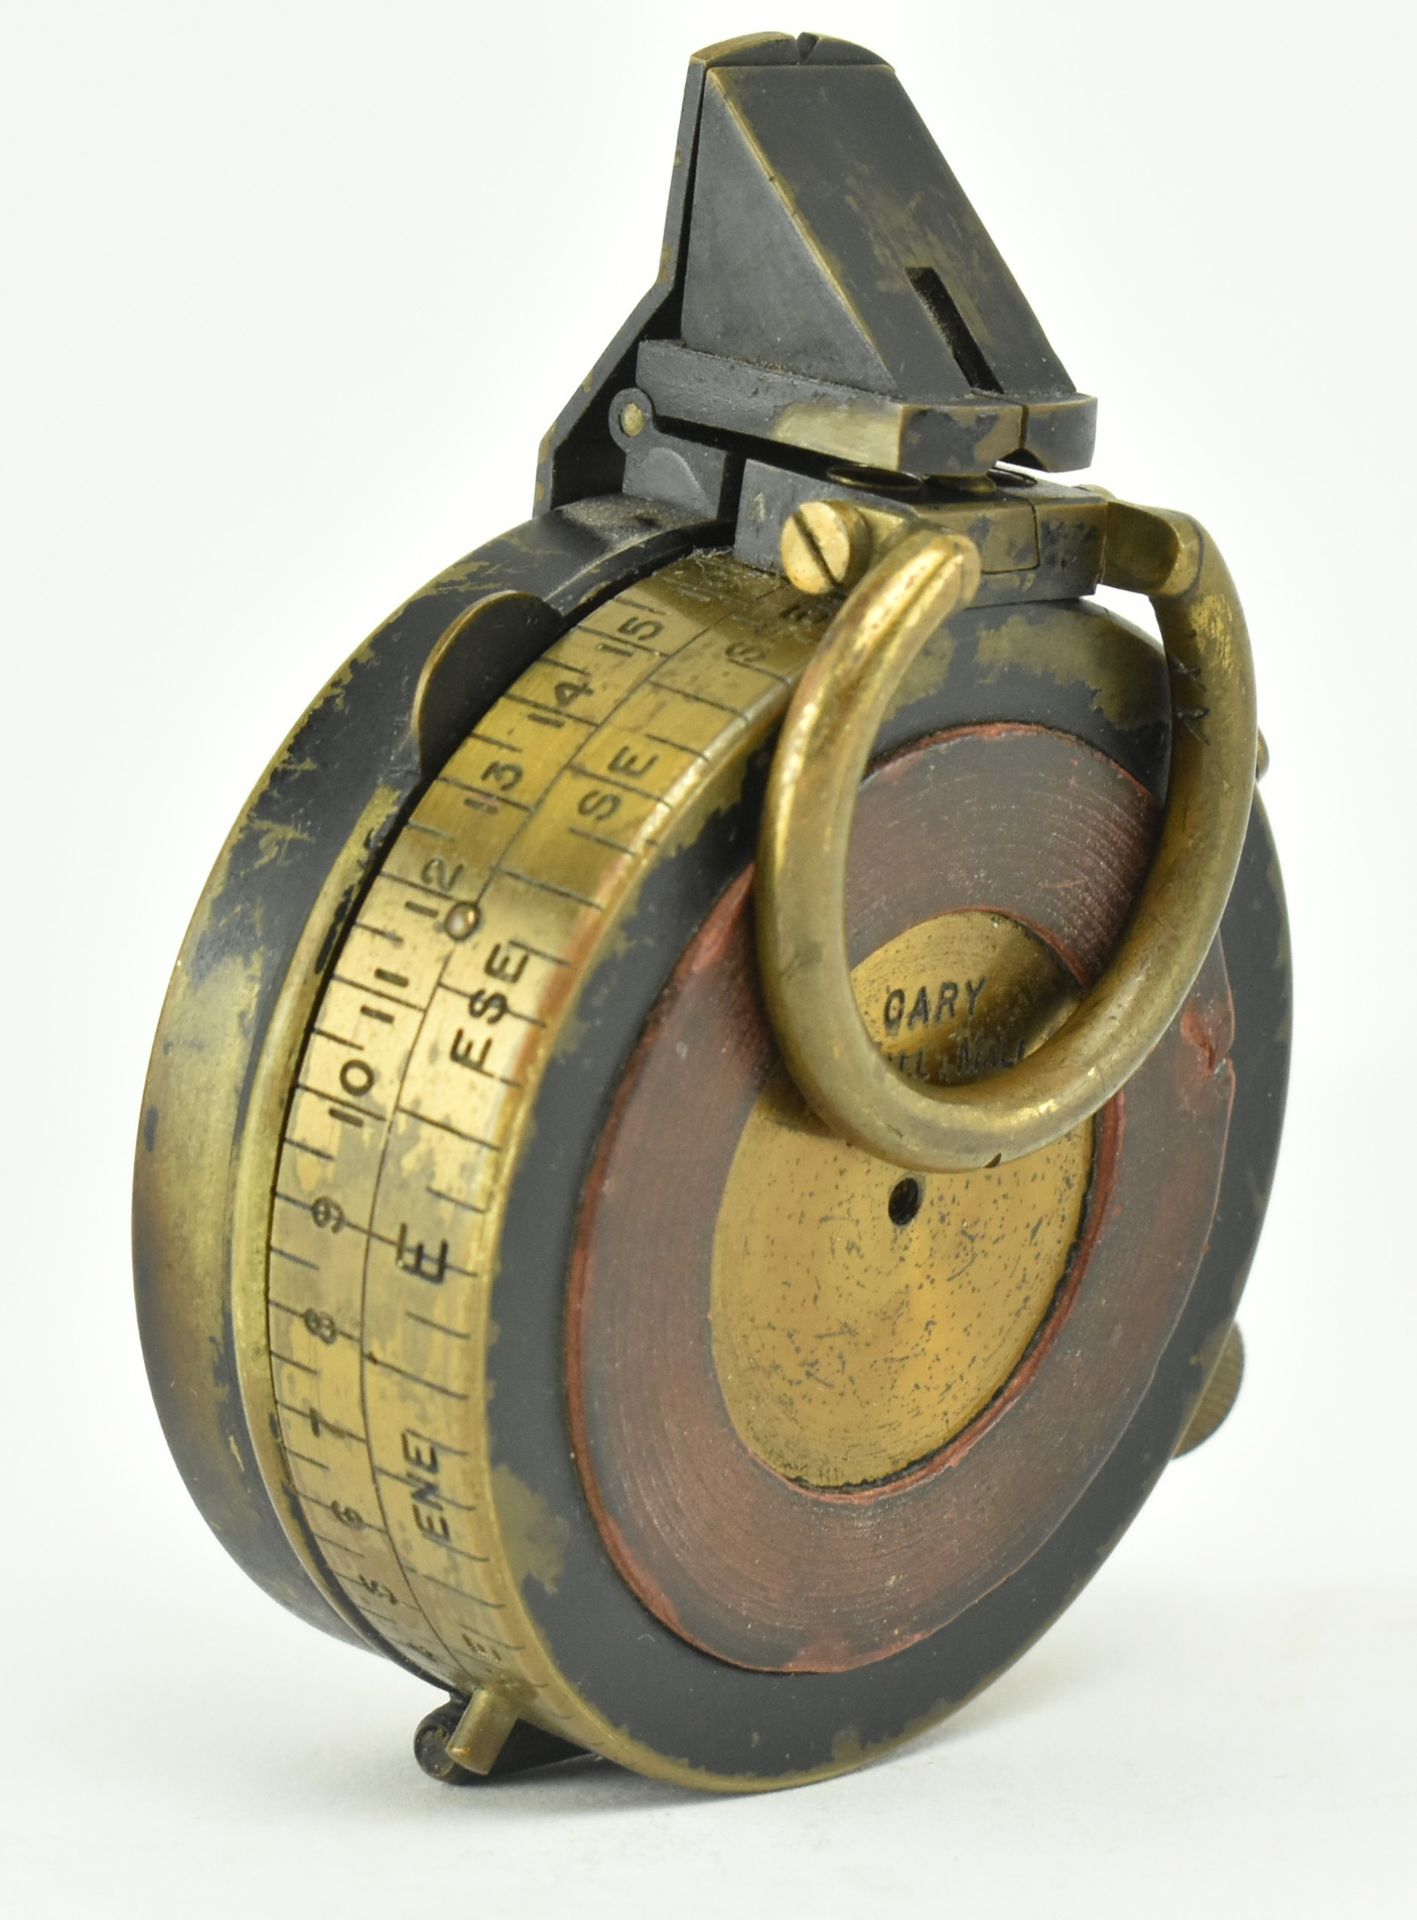 CARY OF LONDON - WW1 ERA COMPASS & AN UNMARKED TELESCOPE - Image 5 of 9